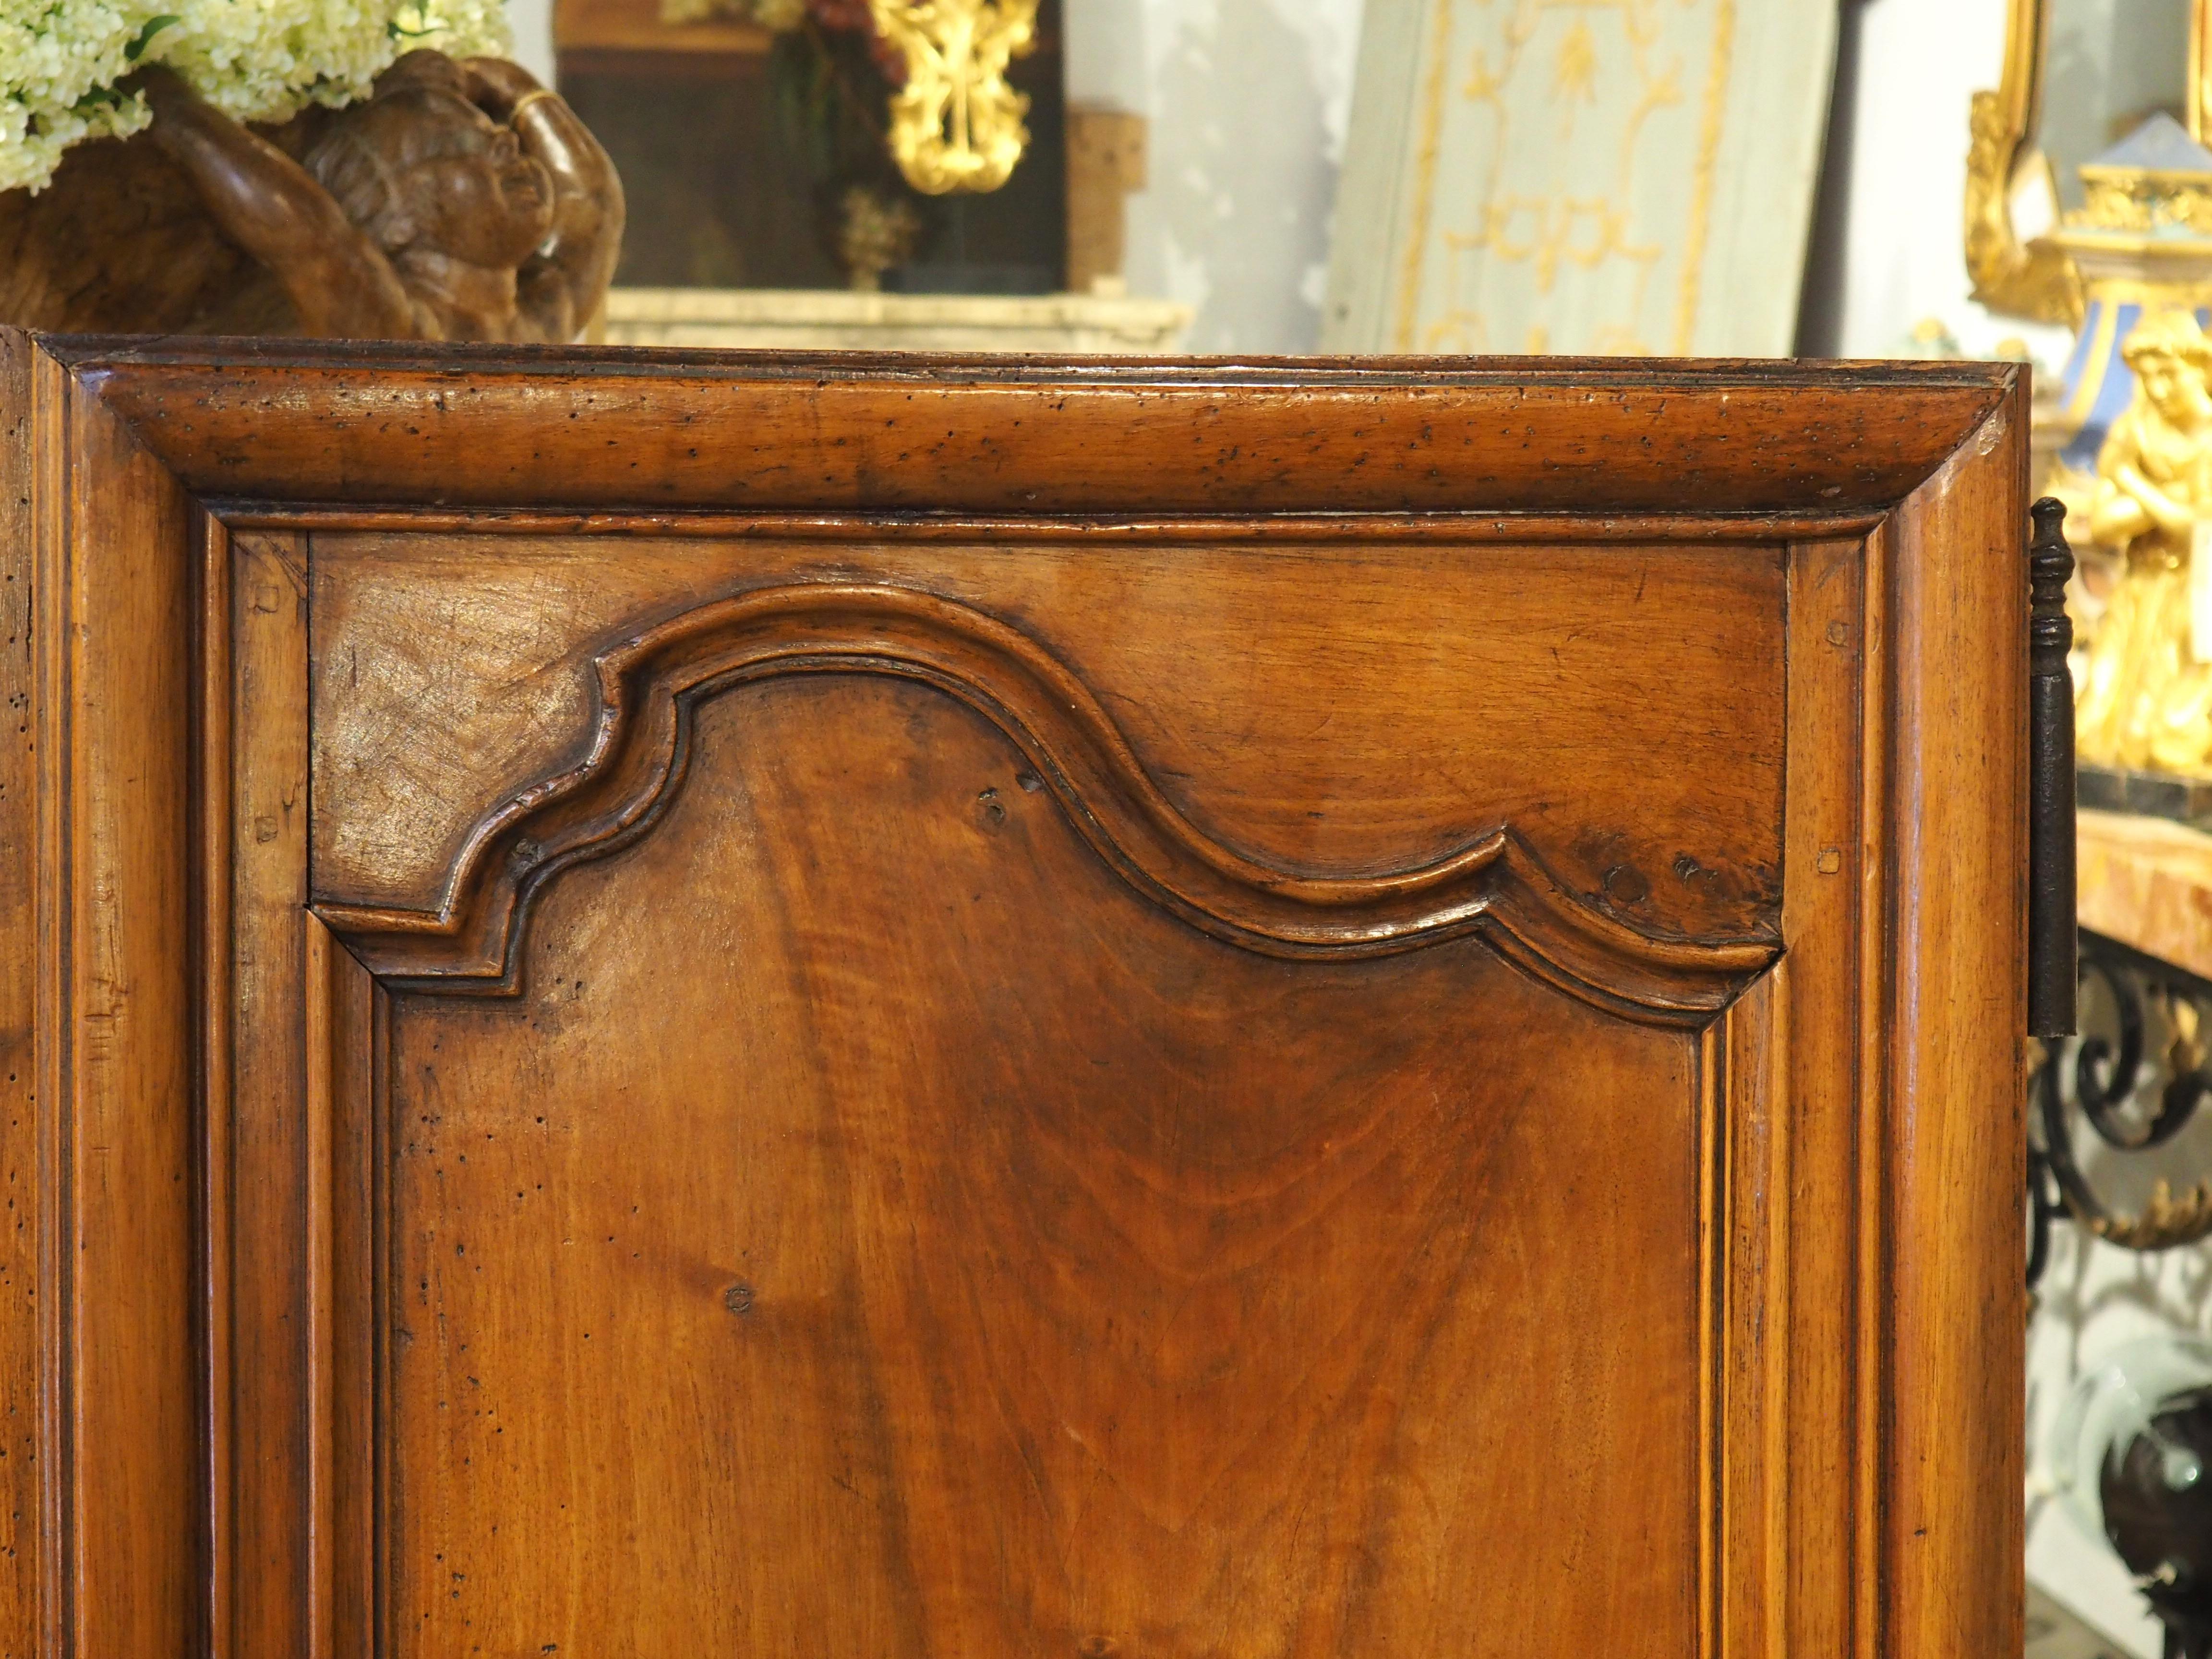 18th Century Pair of Circa 1750 Solid Walnut Façade or Cabinet Doors from Provence, France For Sale